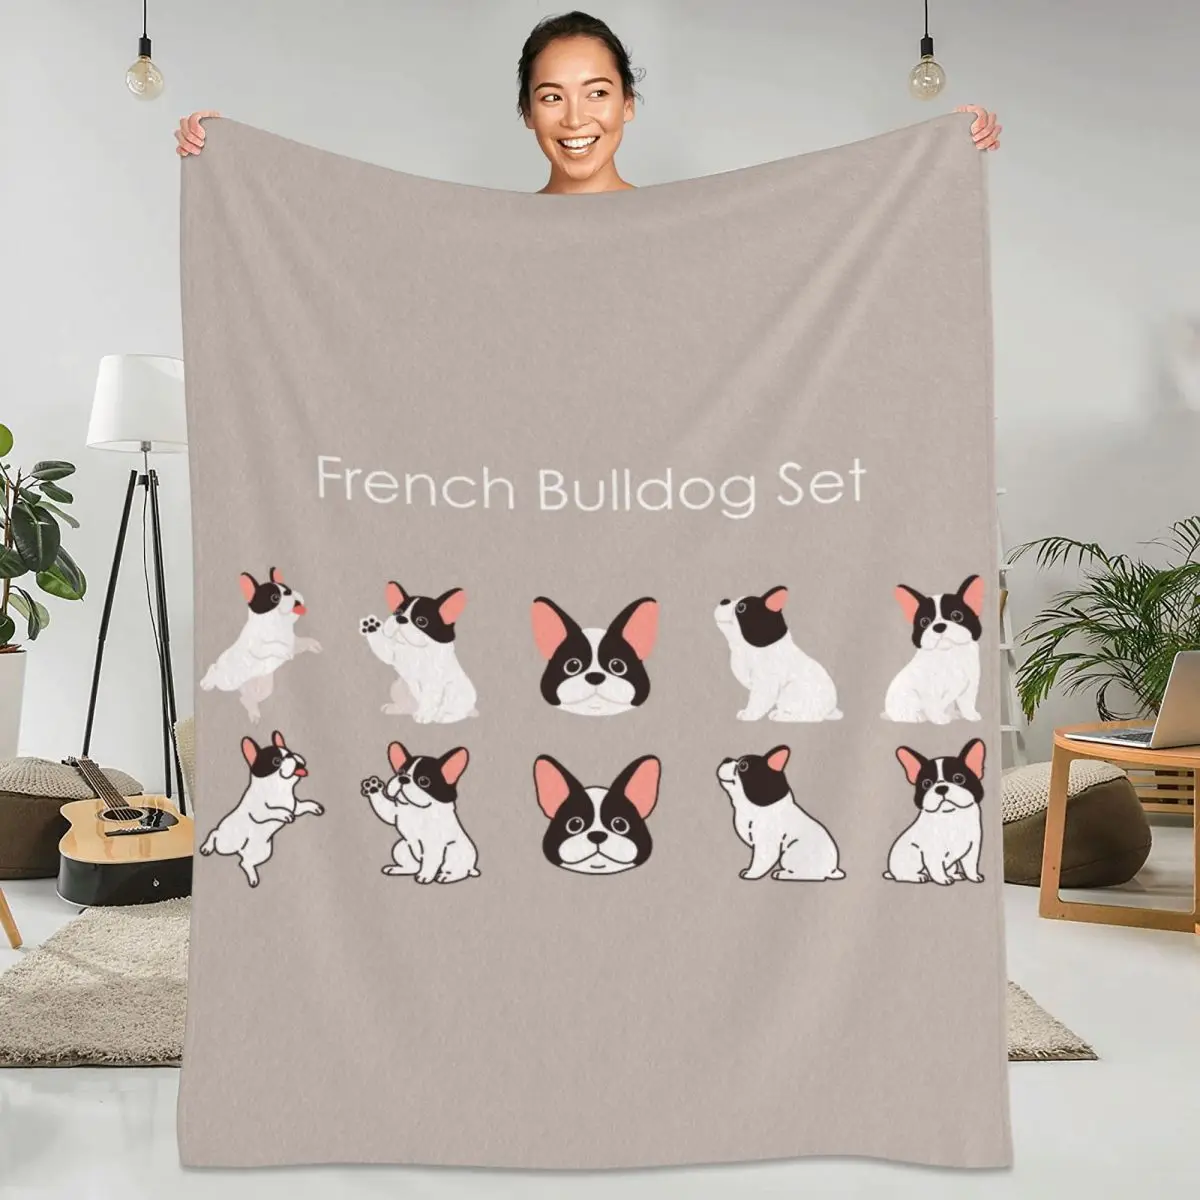 

French Bulldog Flannel Blanket Quality Warm Soft Animal Throw Blanket Winter Camping Outdoor Funny Bedspread